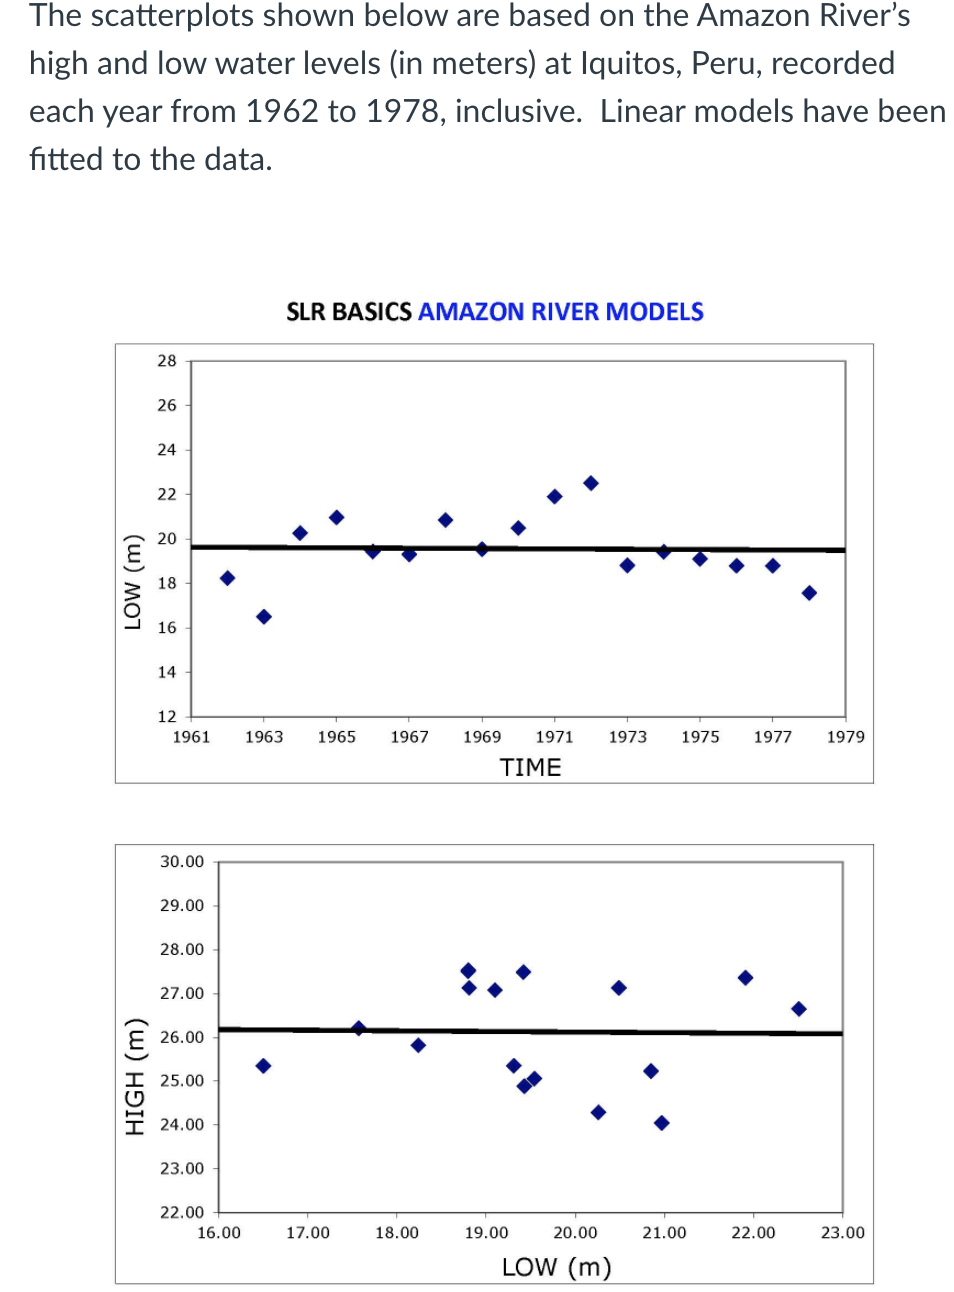 The scatterplots shown below are based on the Amazon River's
high and low water levels (in meters) at Iquitos, Peru, recorded
each year from 1962 to 1978, inclusive. Linear models have been
fitted to the data.
SLR BASICS AMAZON RIVER MODELS
28
26
24
22
20
18
16
14
12
1961
1963
1965
1967
1969
1971
1973
1975
1977
1979
ΤΙΜE
30.00
29.00
28.00
27.00
26.00
25.00
24.00
23.00
22.00
16.00
17.00
18.00
19.00
20.00
21.00
22.00
23.00
LOW (m)
HIGH (m)
LOW (m)
